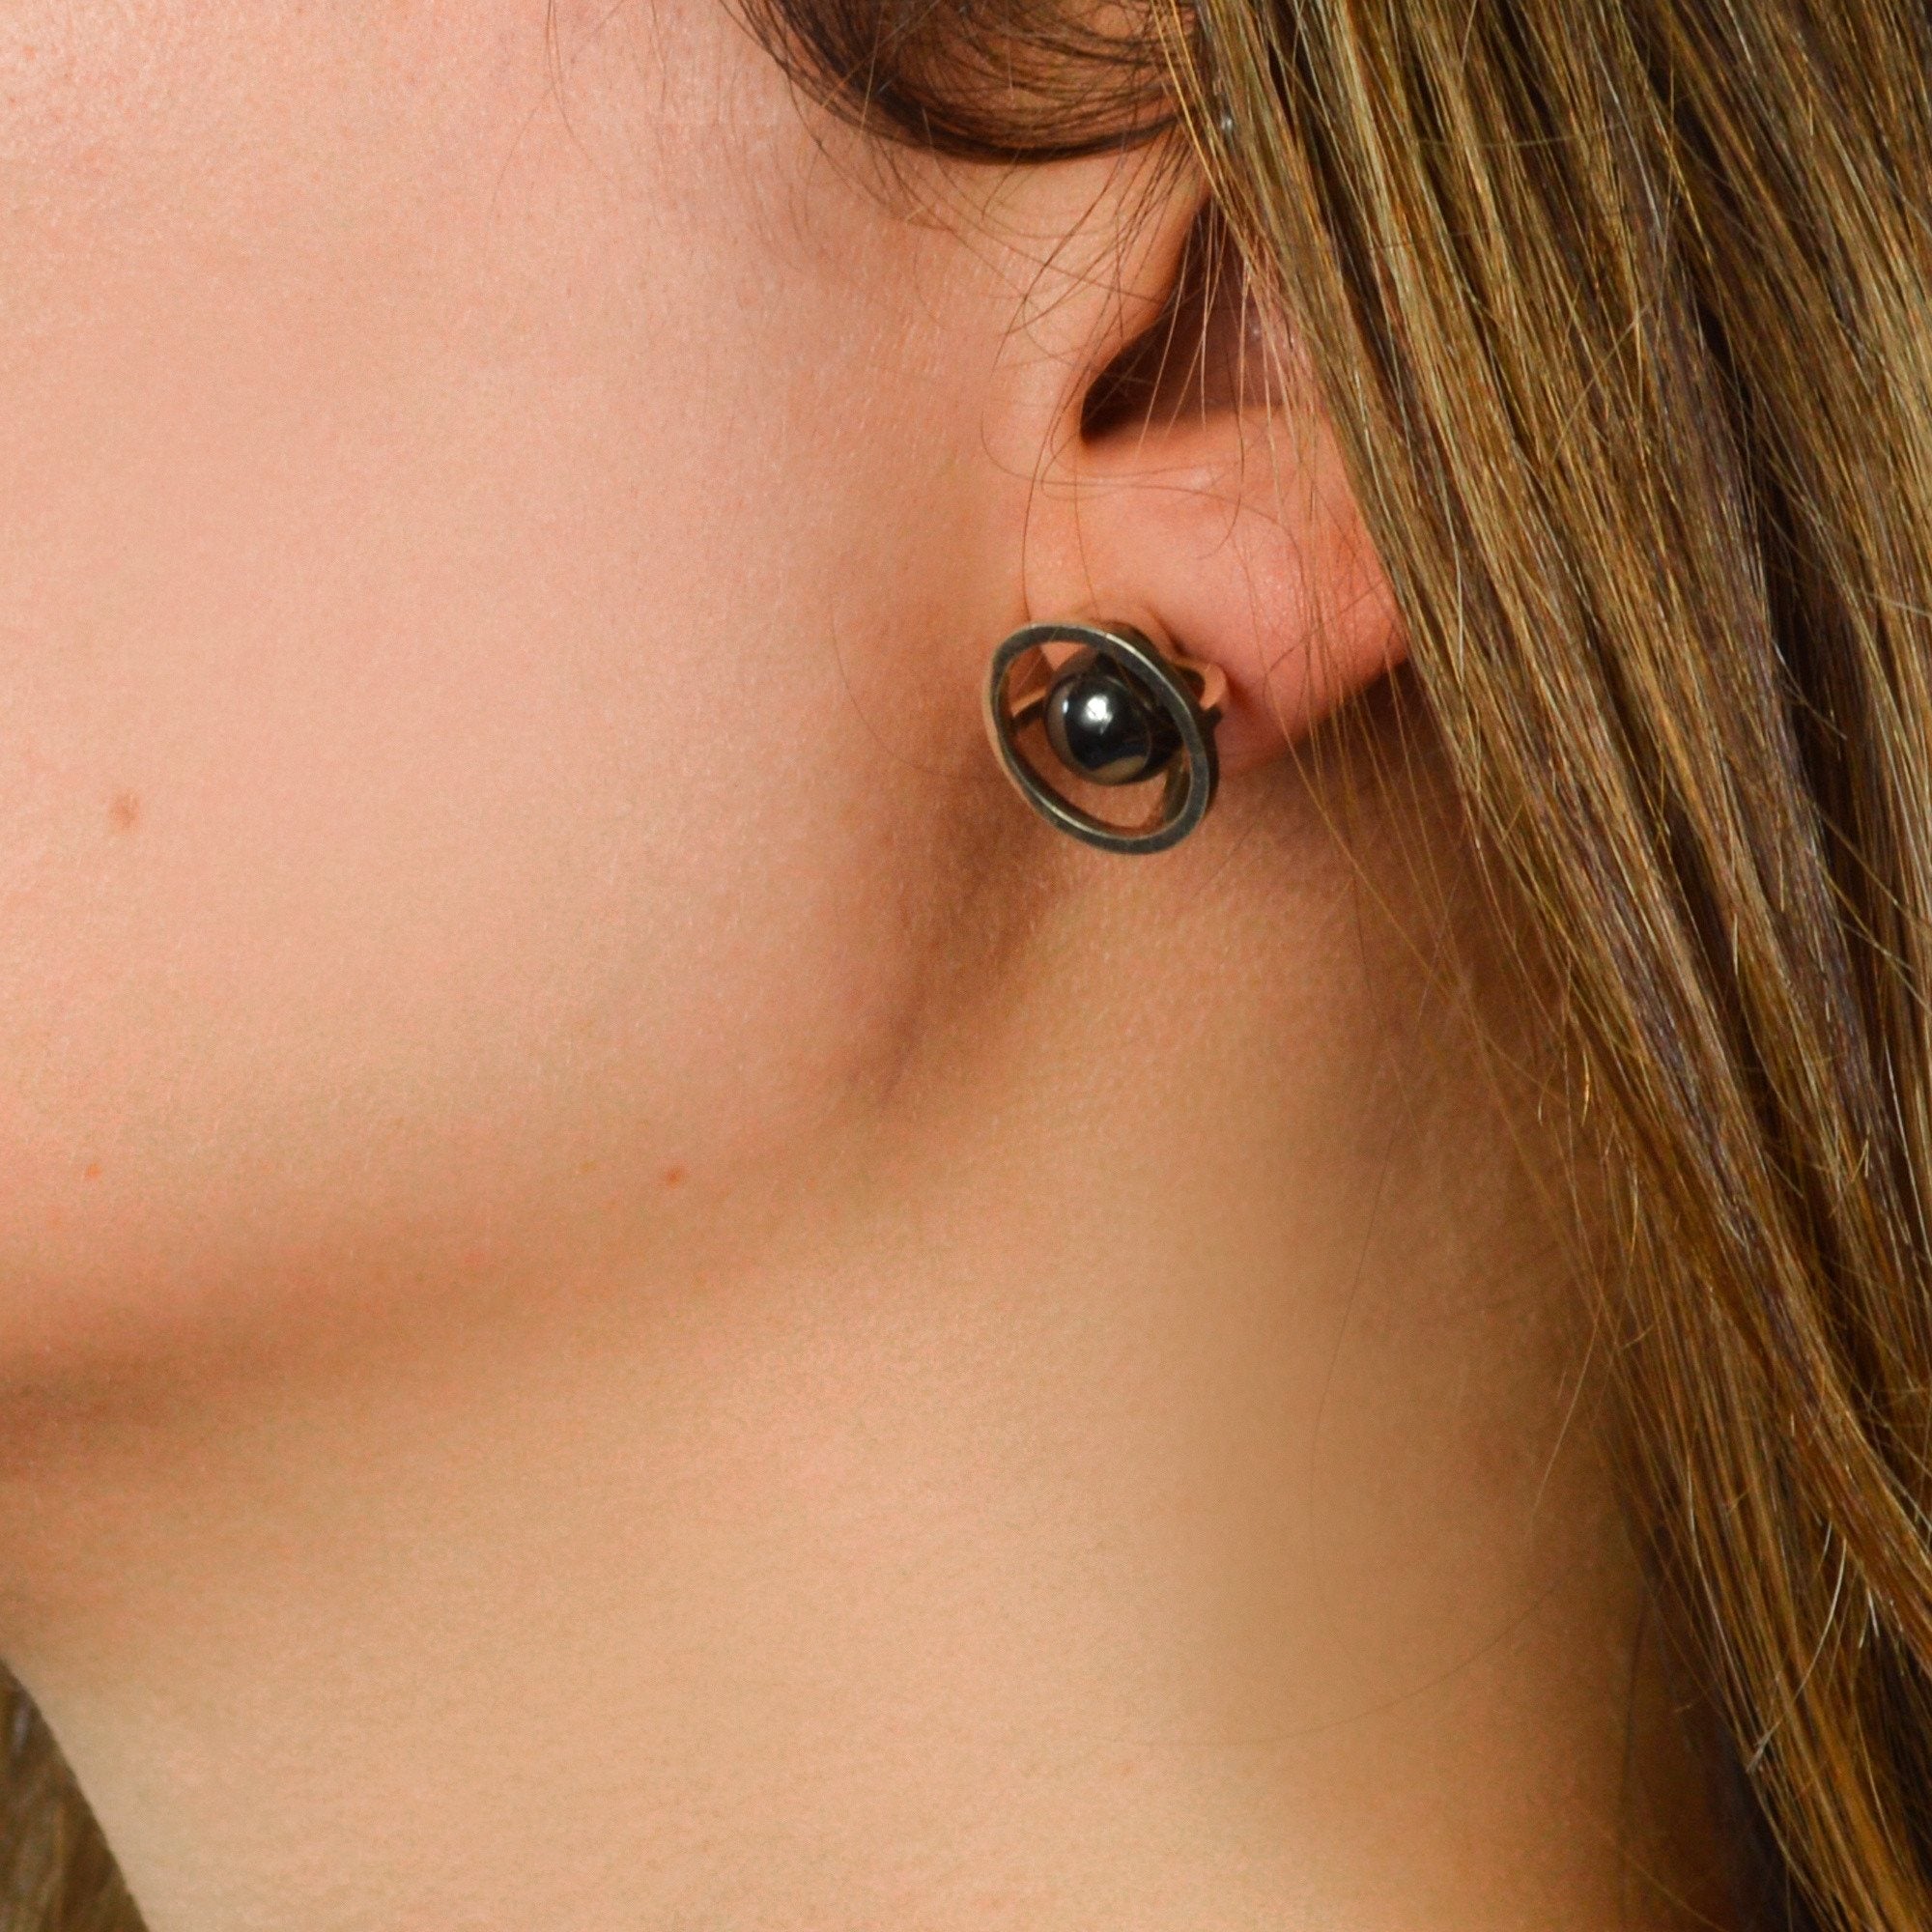 Sphere of Reflection Stud Earrings in Sterling Silver, Dark Patina Finish, and Hematite